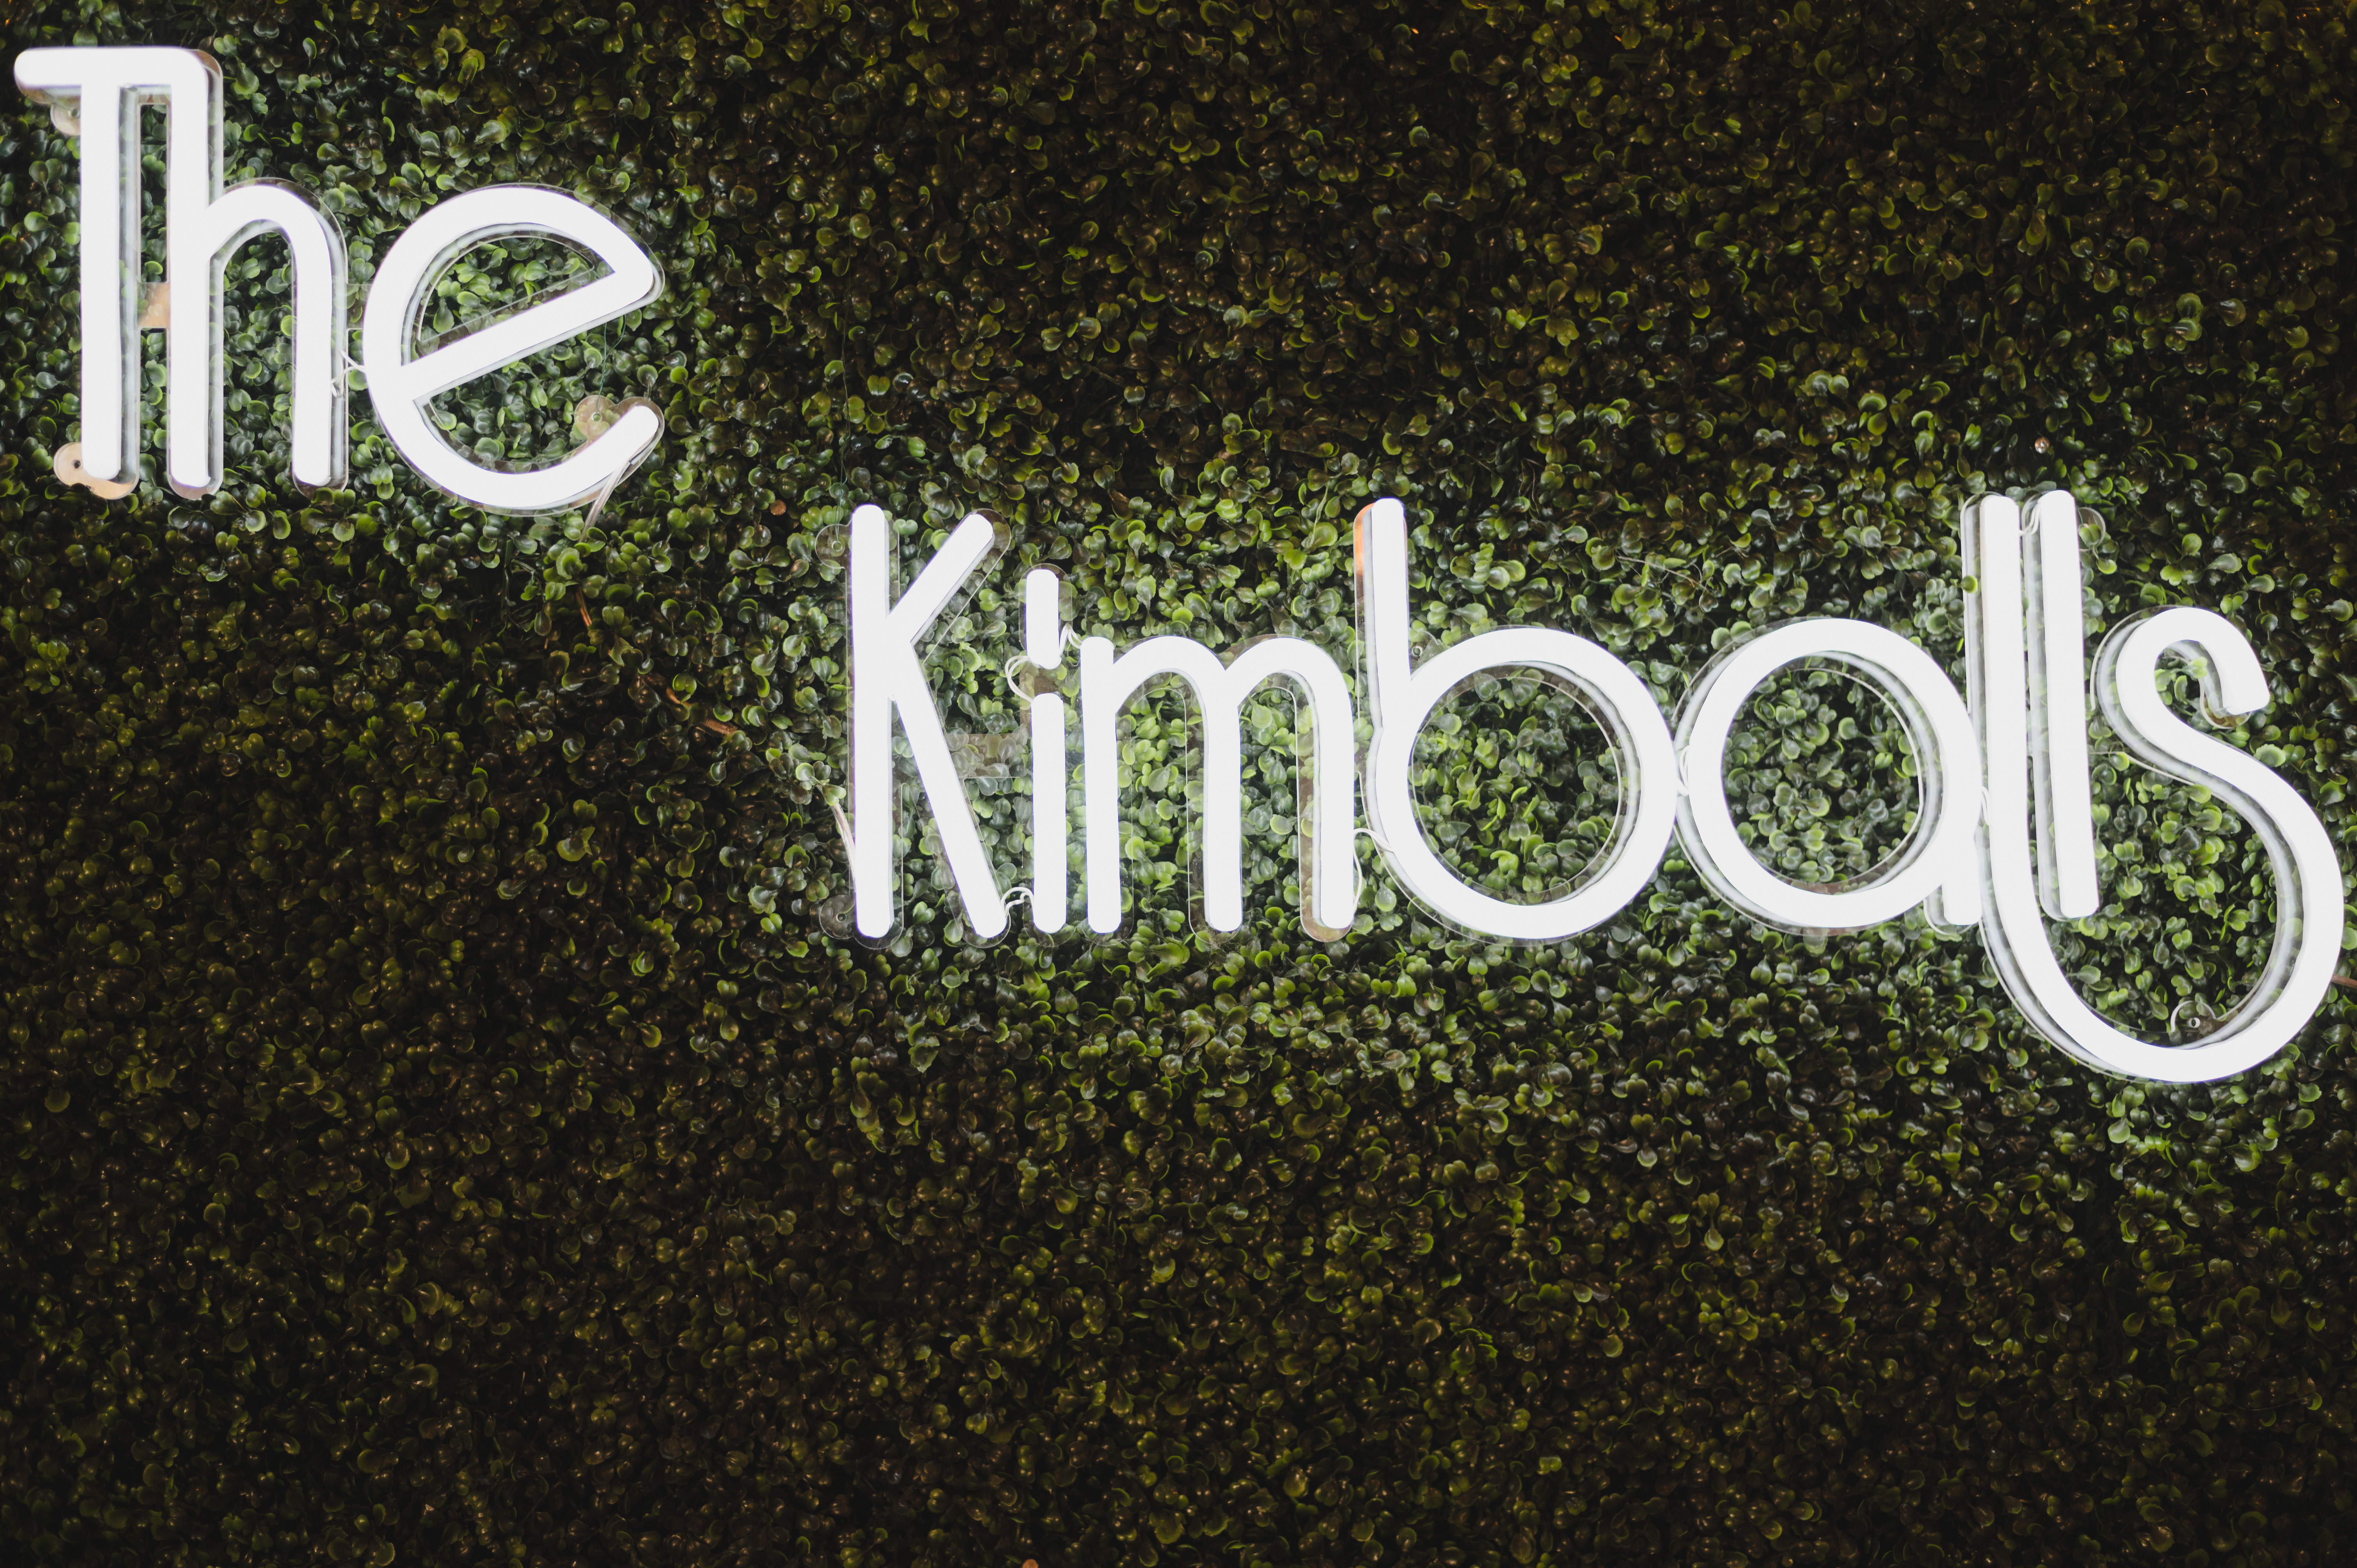 A neon sign on a grass wall that says "The Kimballs" for Jordan and Christina Kimball's wedding in Houston, TX.